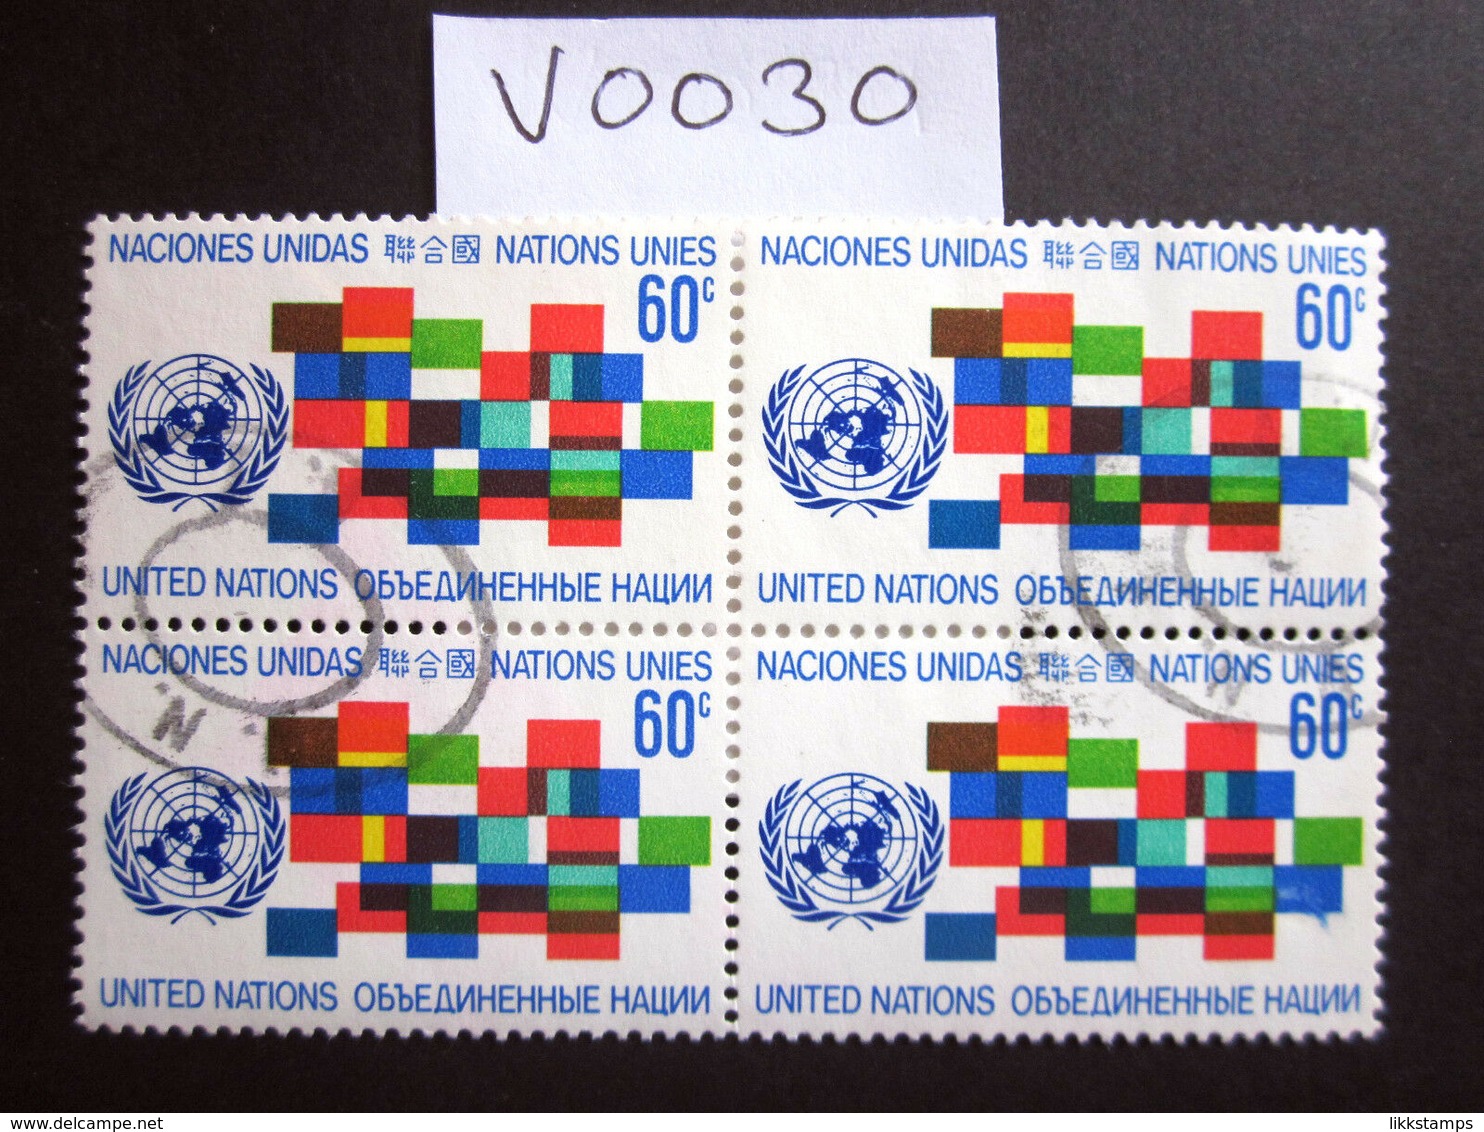 1971 A FINE USED BLOCK OF 4 "SG 223" PICTORIAL UNITED NATIONS USED STAMPS ( V0030 ) #00358 - Colecciones & Series